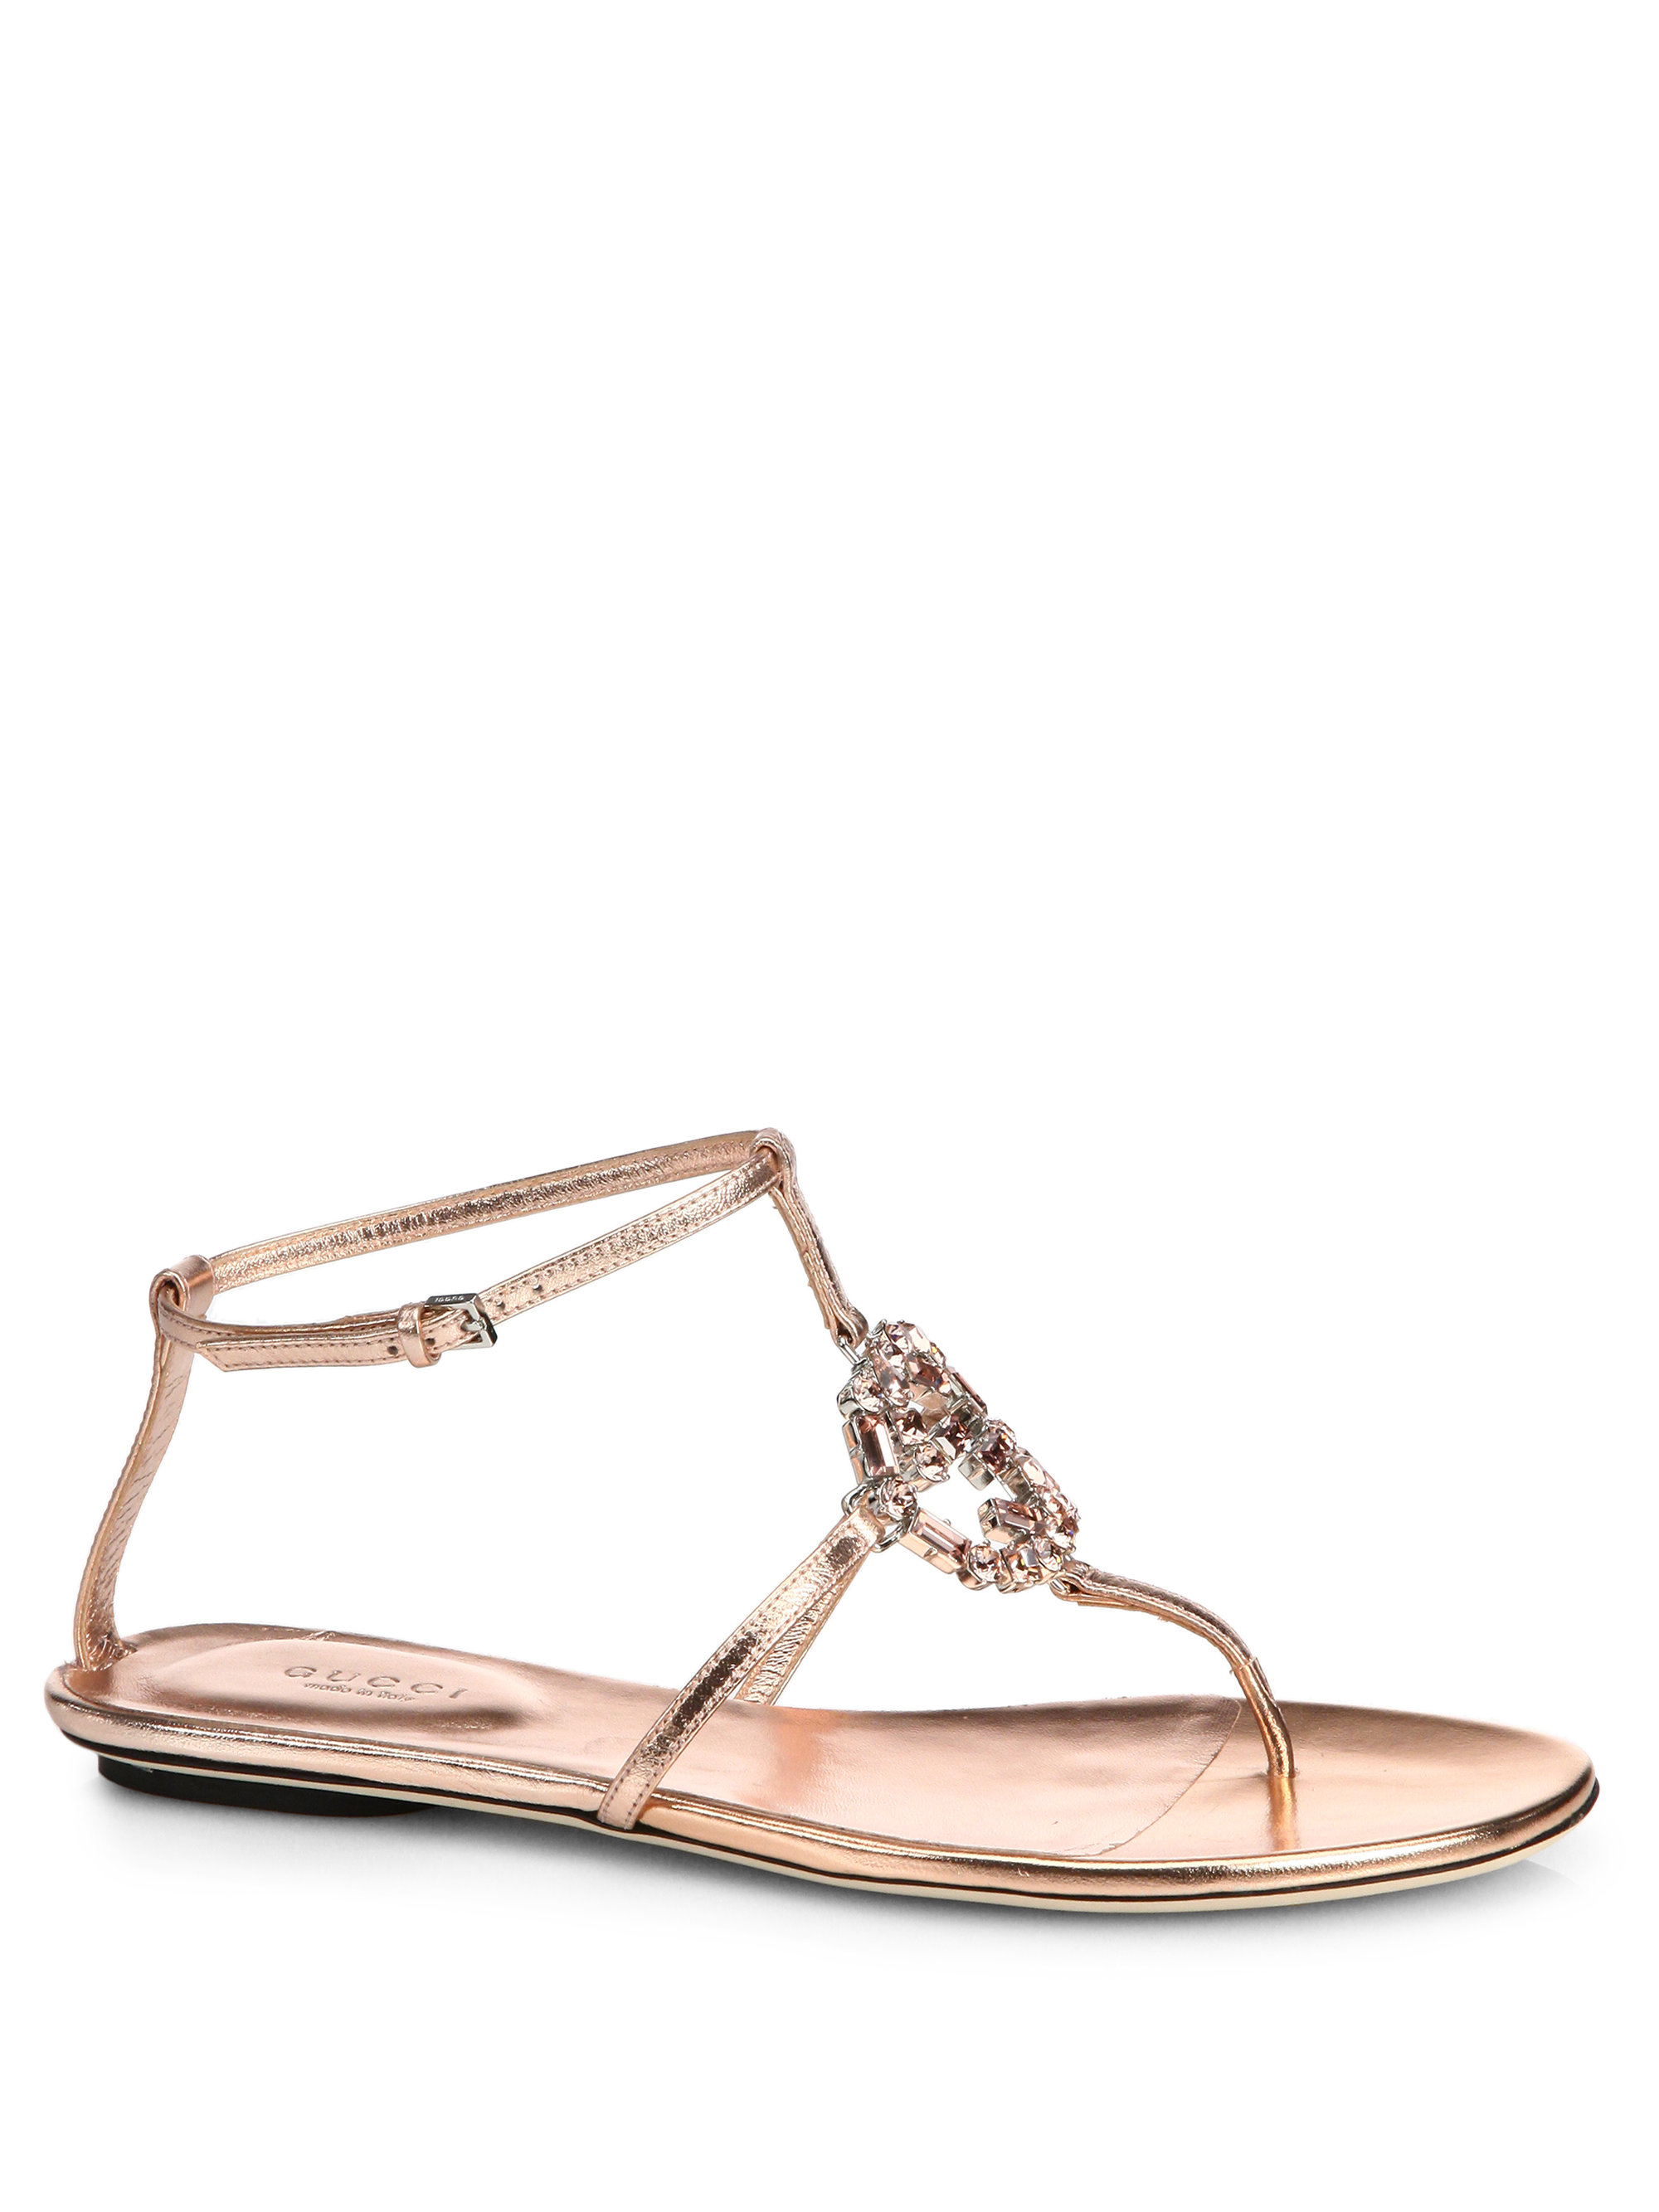 Gucci Gg Sparkling Crystal & Leather Sandals in Pink | Lyst